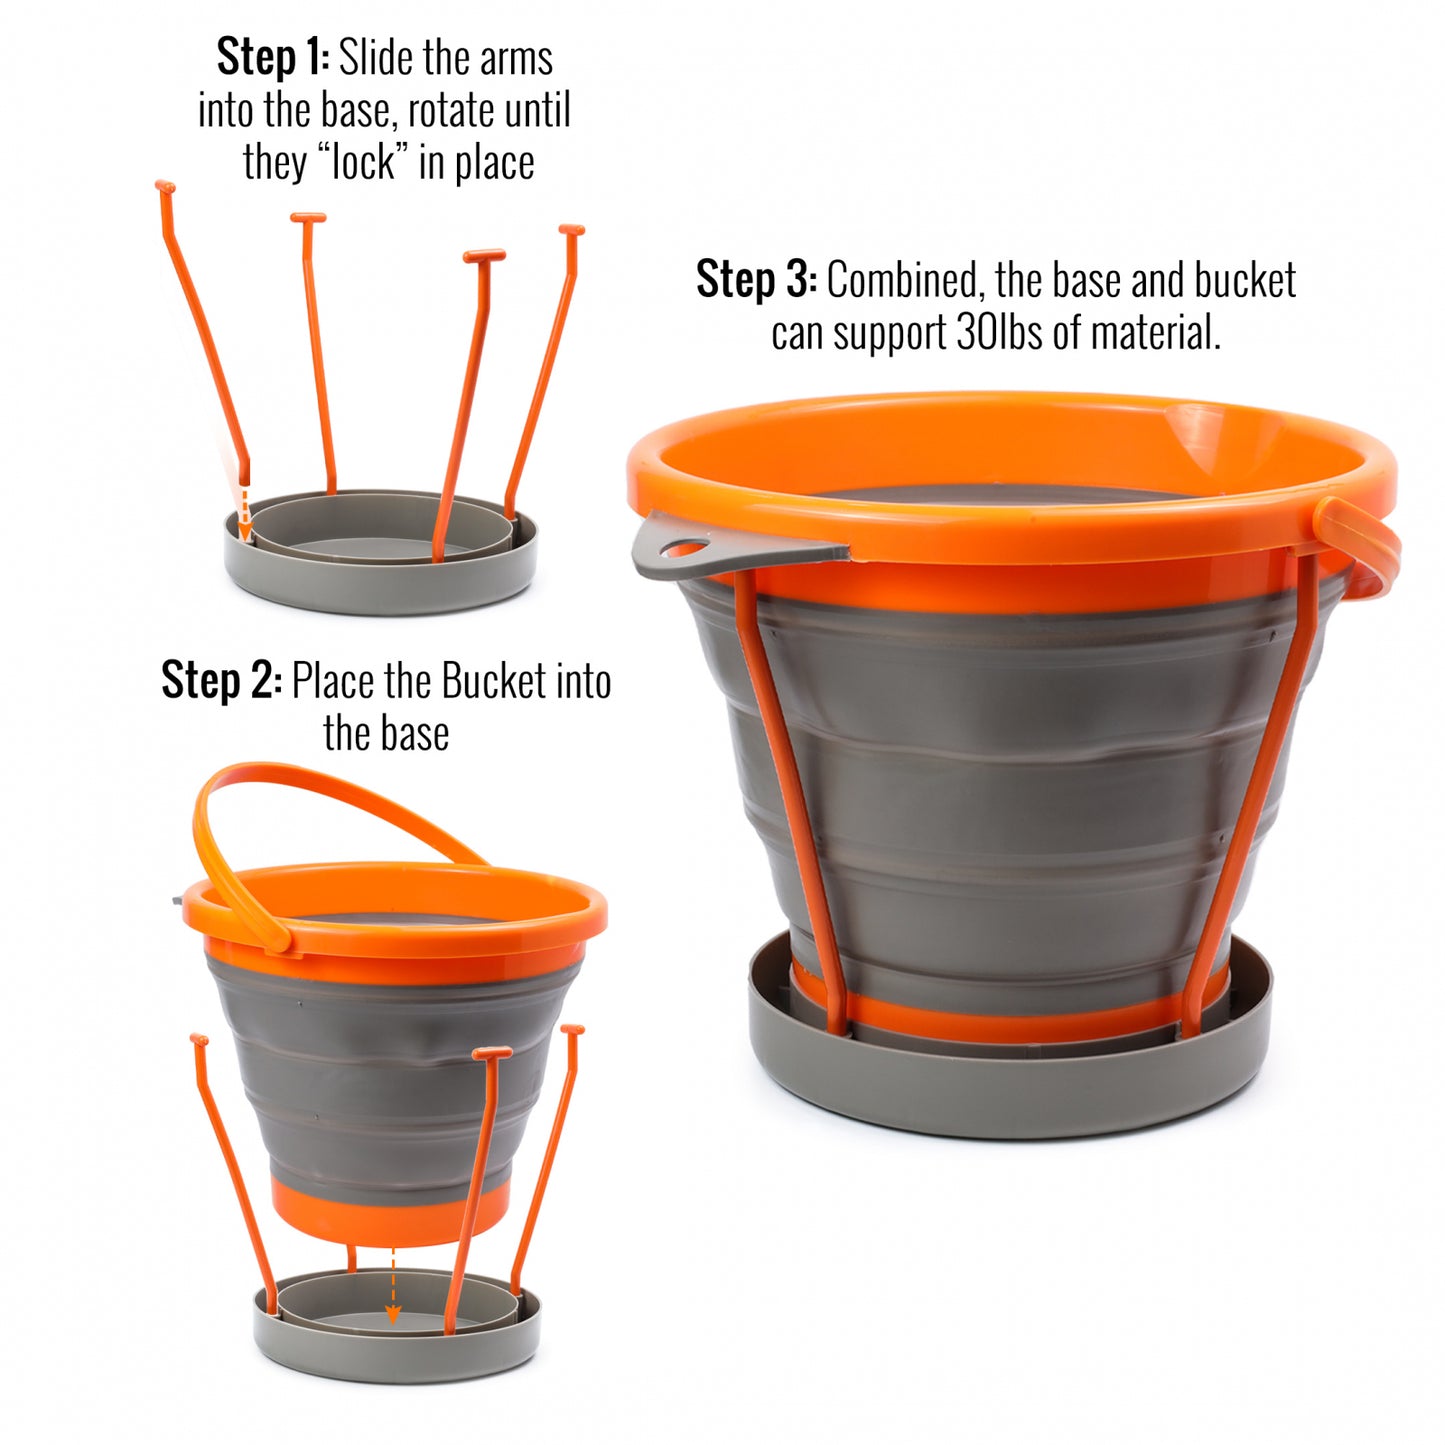 ASR Outdoor 10L Collapsible Bucket and Stand Gold Prospecting Equipment, 6pc